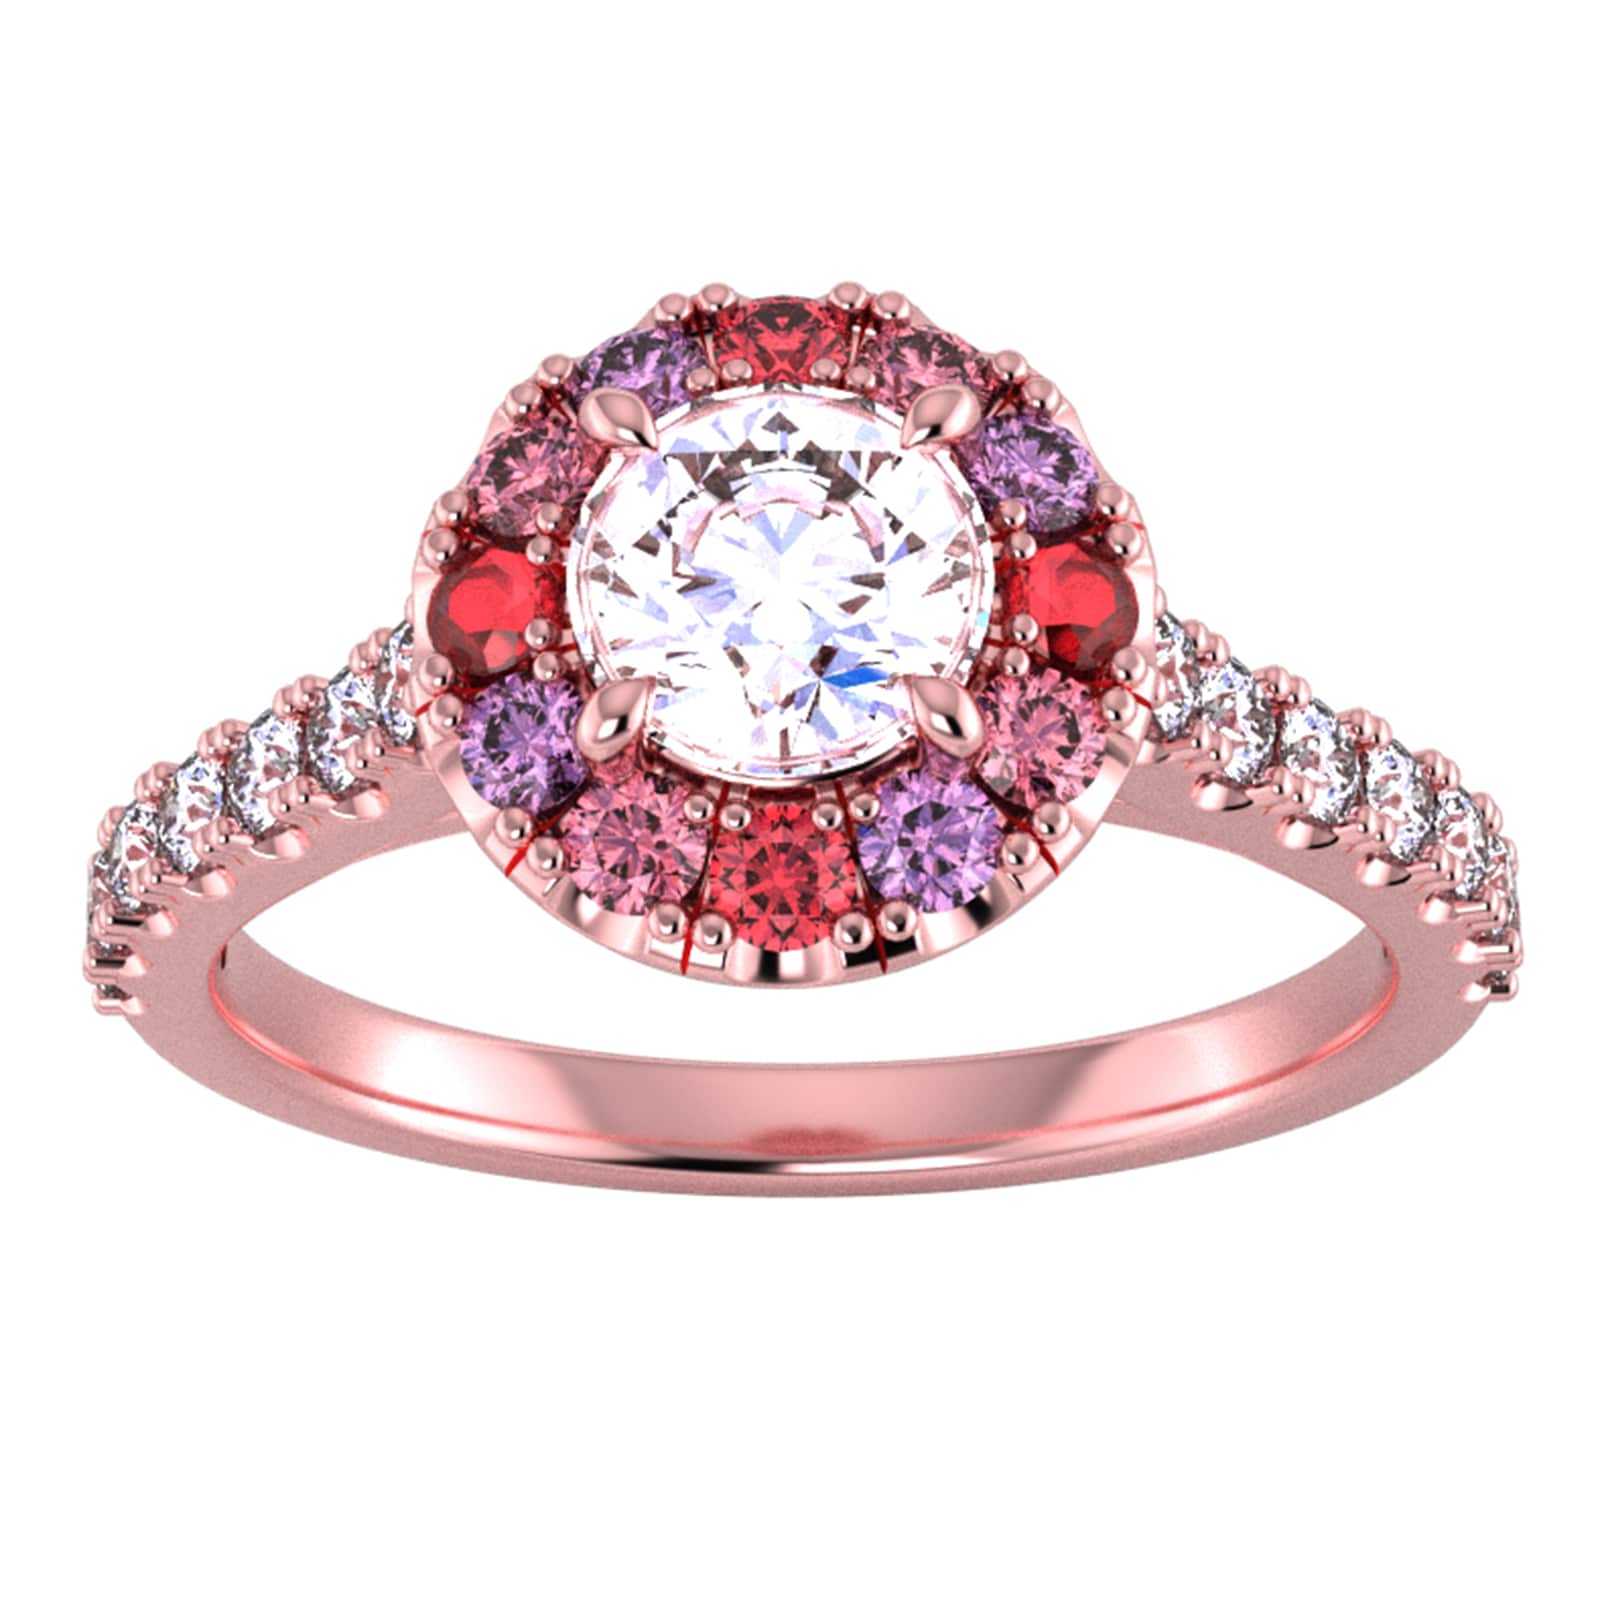 18ct Rose Gold Diamond & Pink, Red, Purple Sapphire Halo Ring - Ring Size W